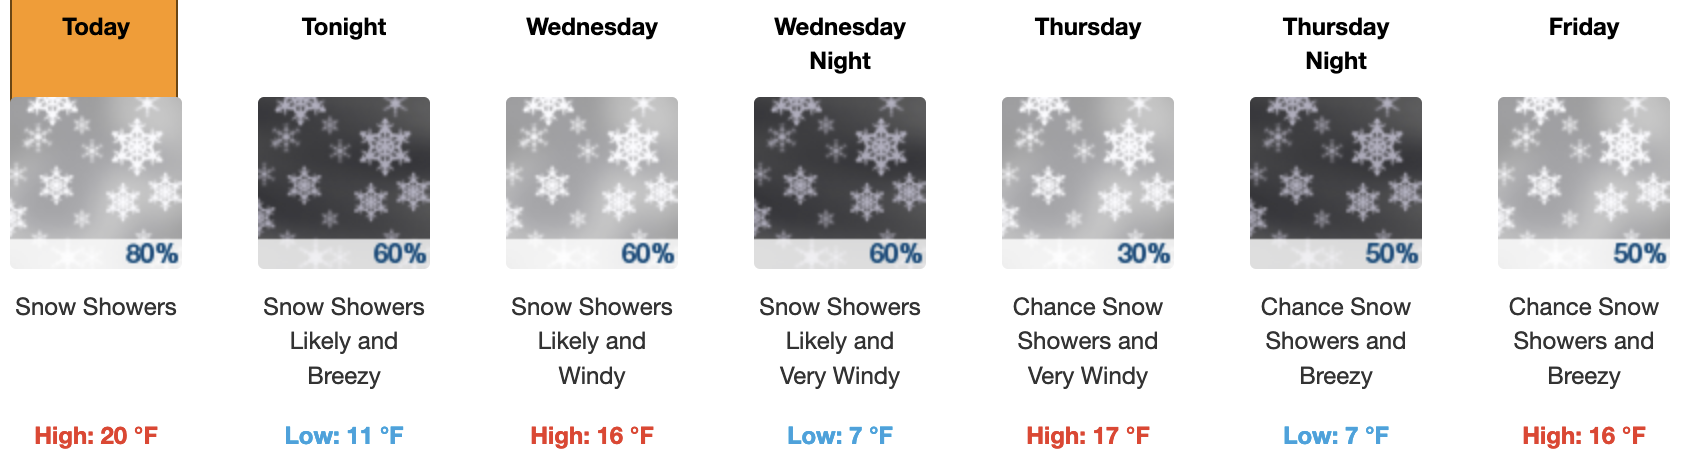 NWS Spot Forecast for Main Lodge